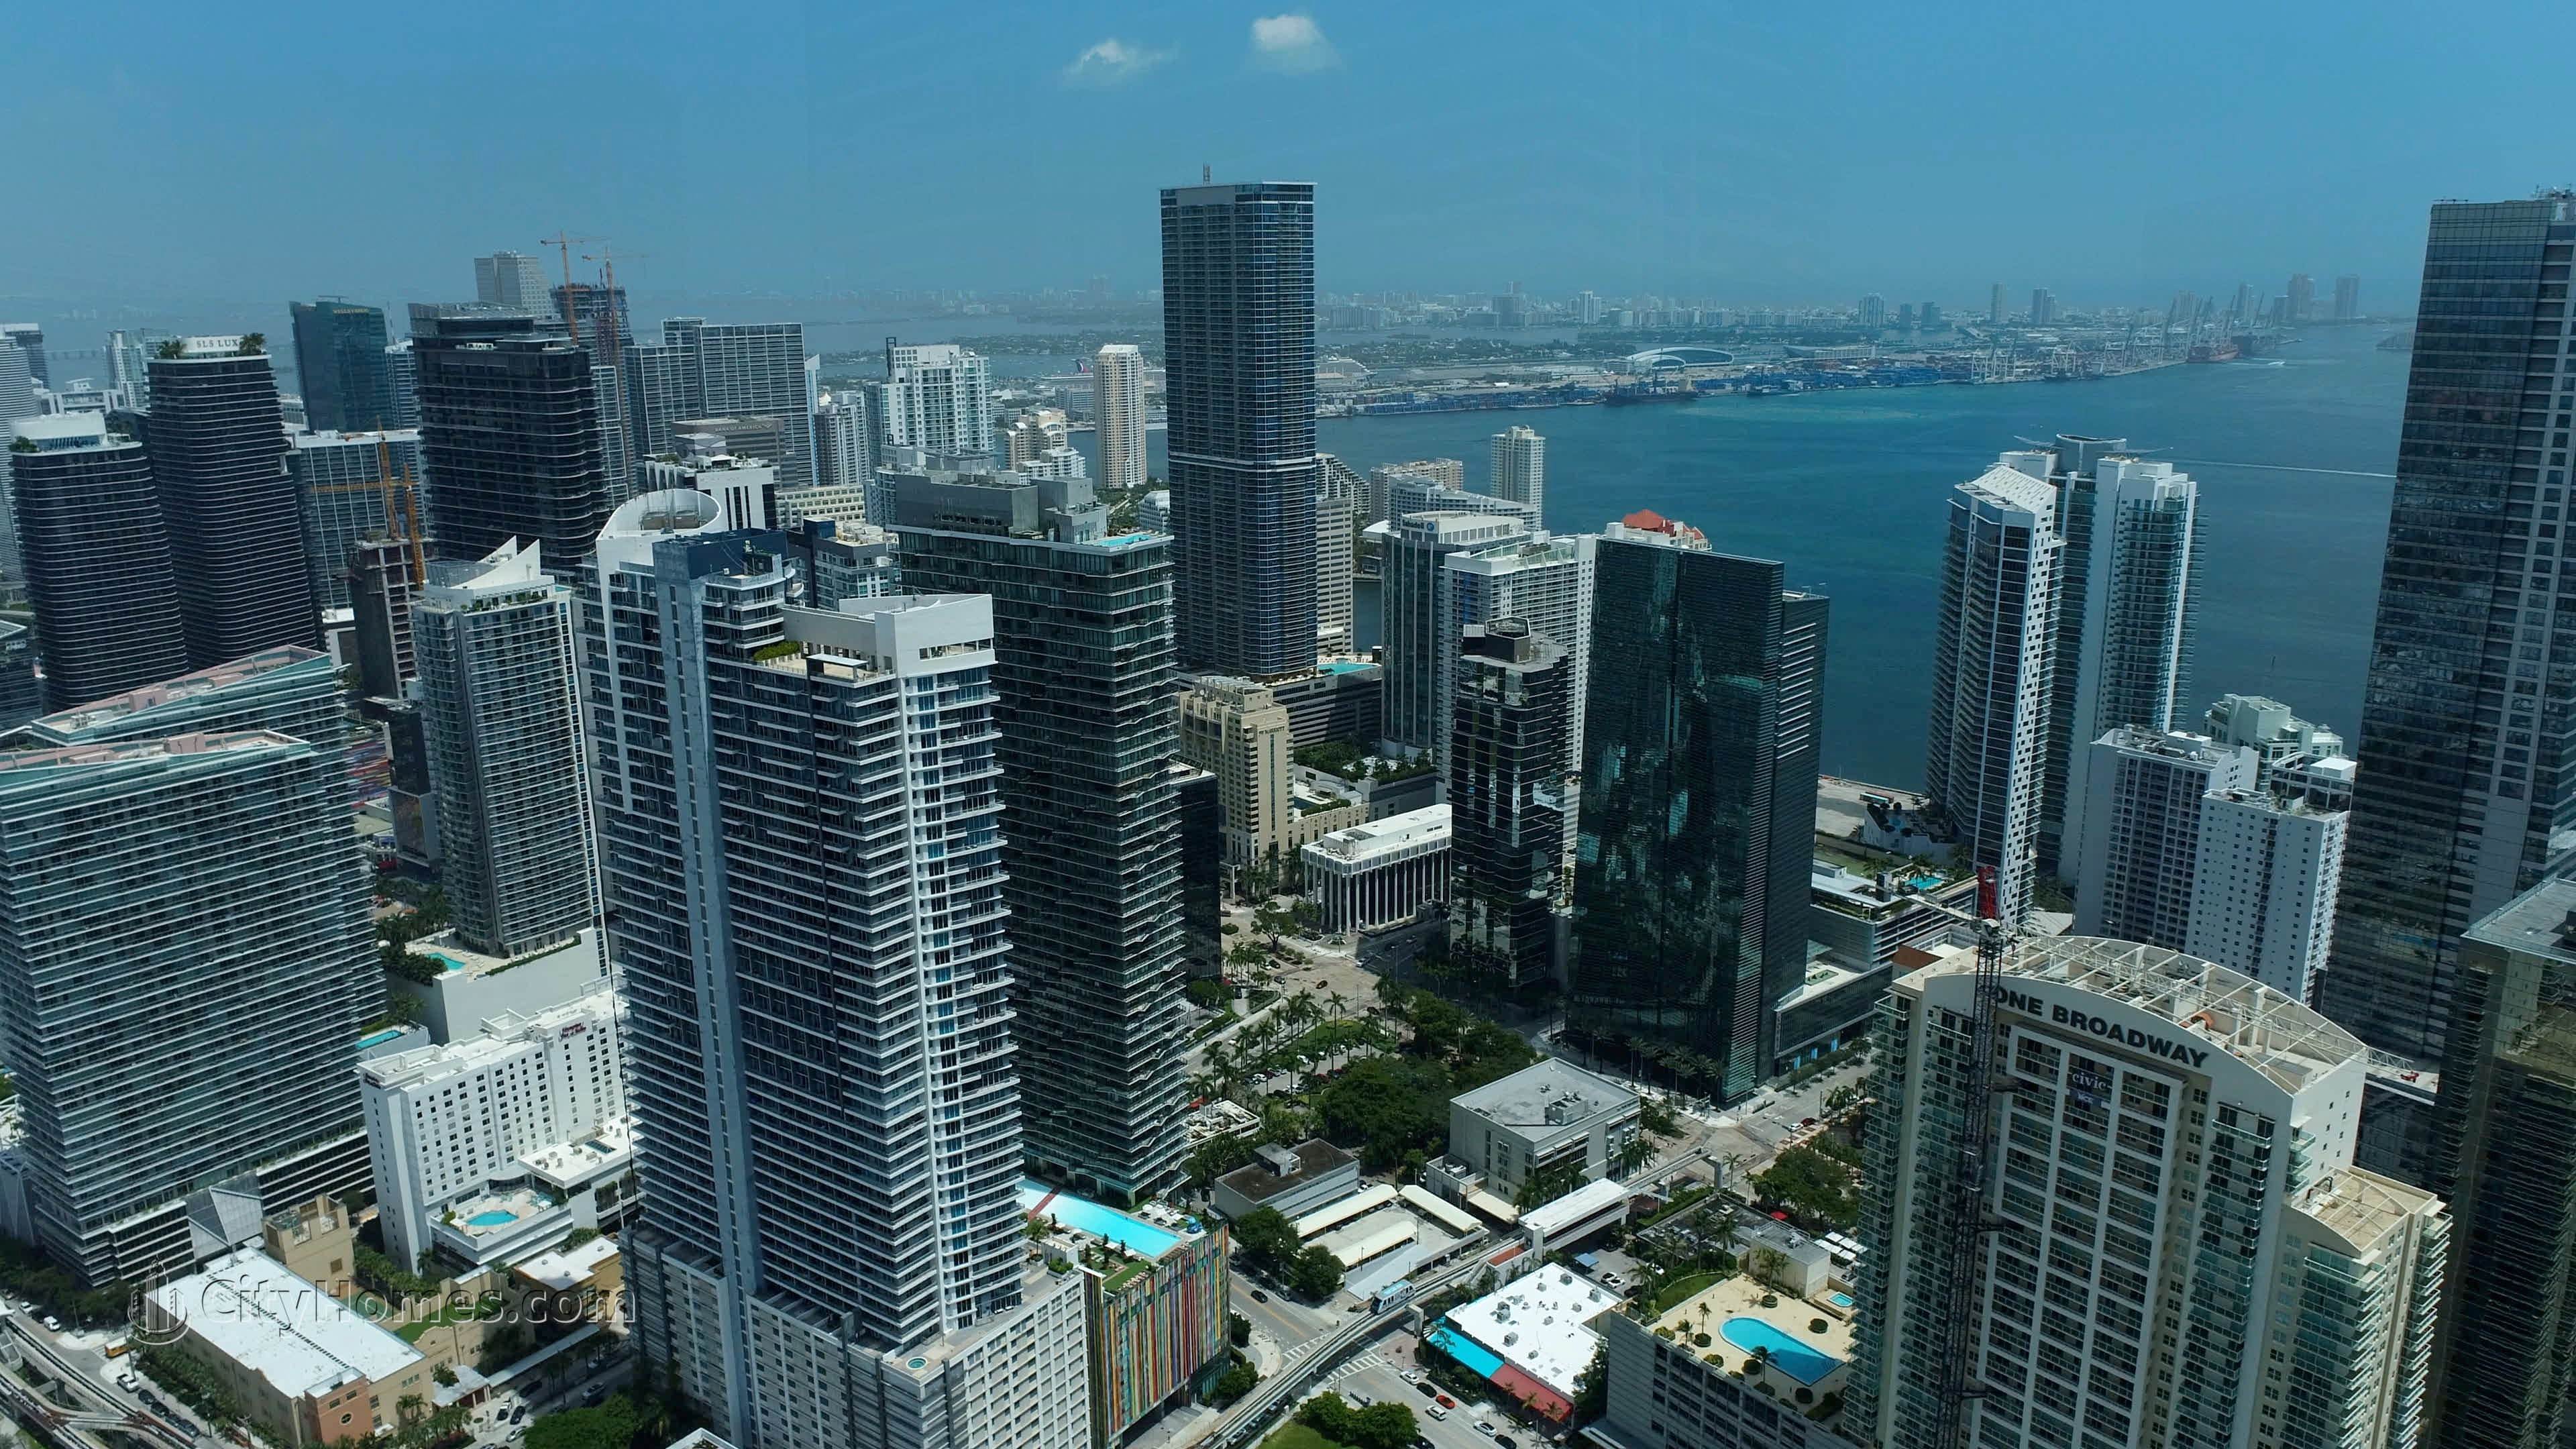 2. Infinity building at 60 SW 13th St, Brickell, Miami, FL 33130